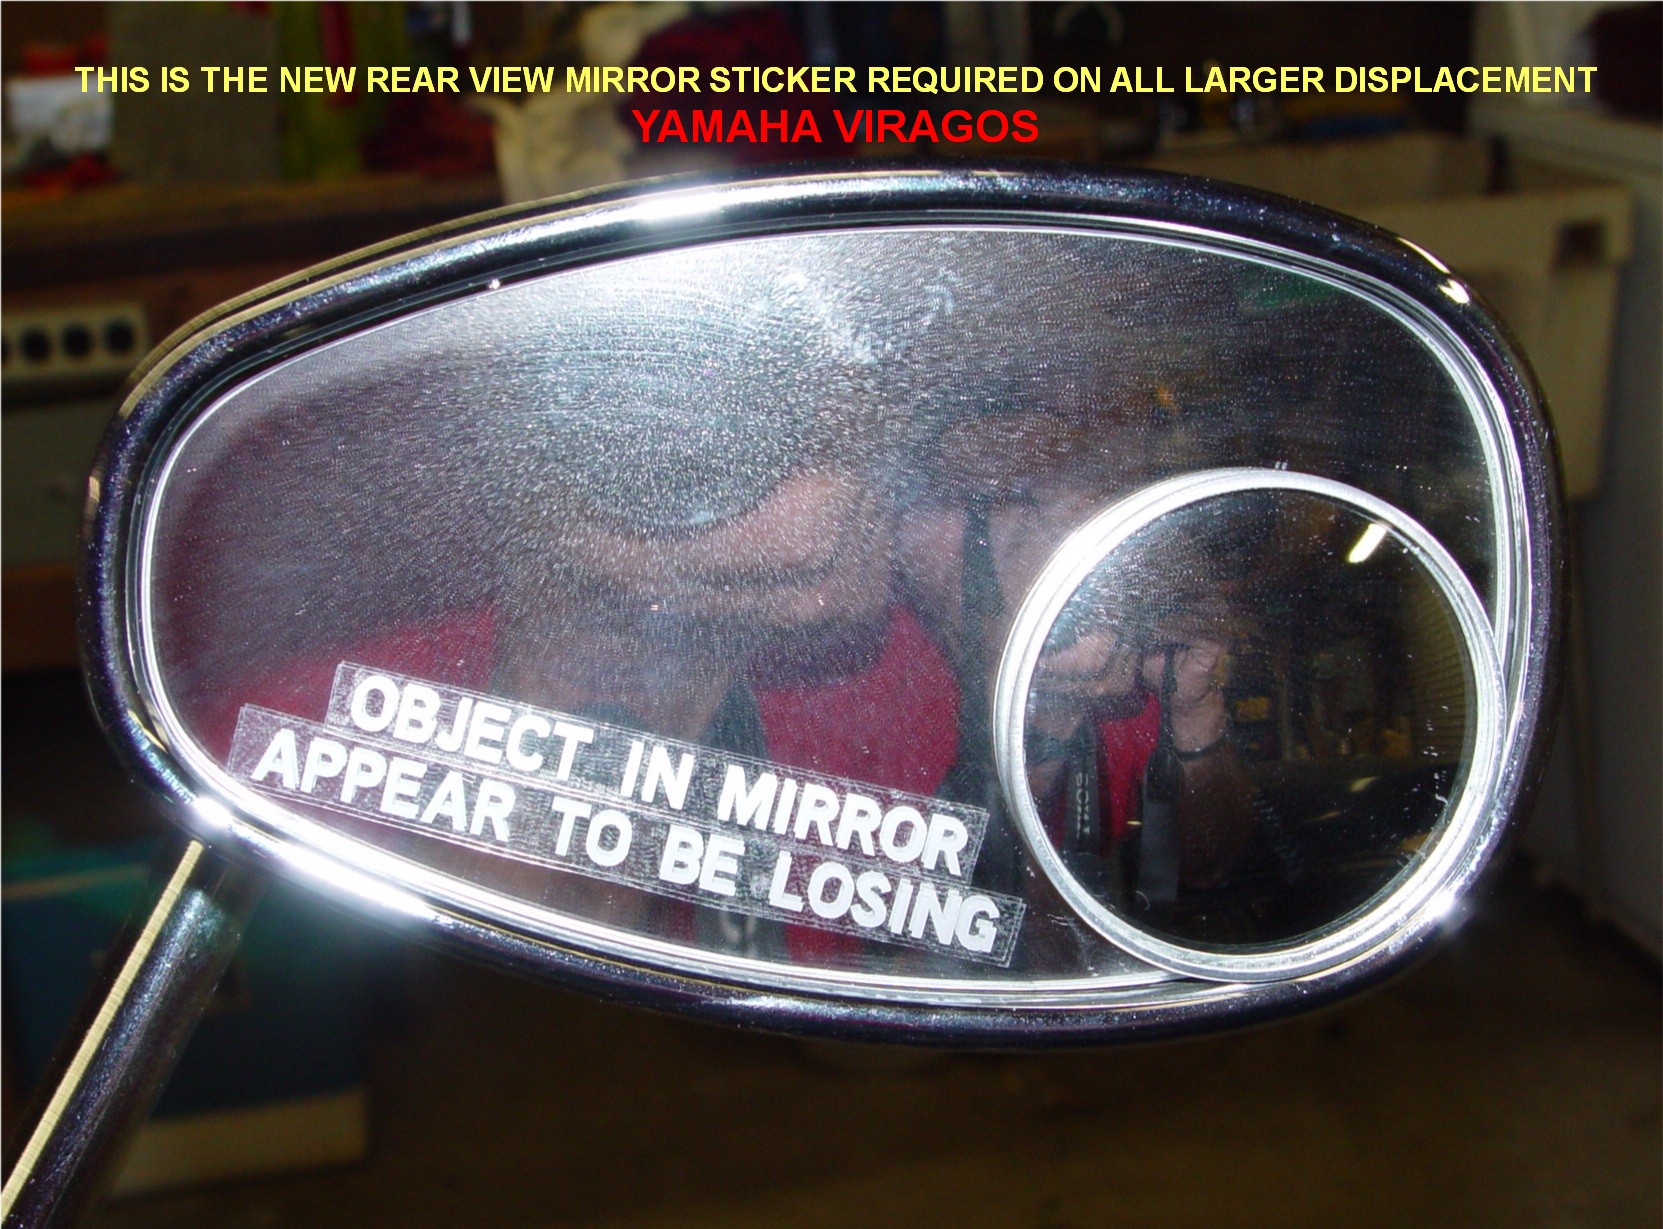 NEW MIRROR STICKER ISSUED FOR LARGER DISPLACEMENT YAMAHA VIRAGOS